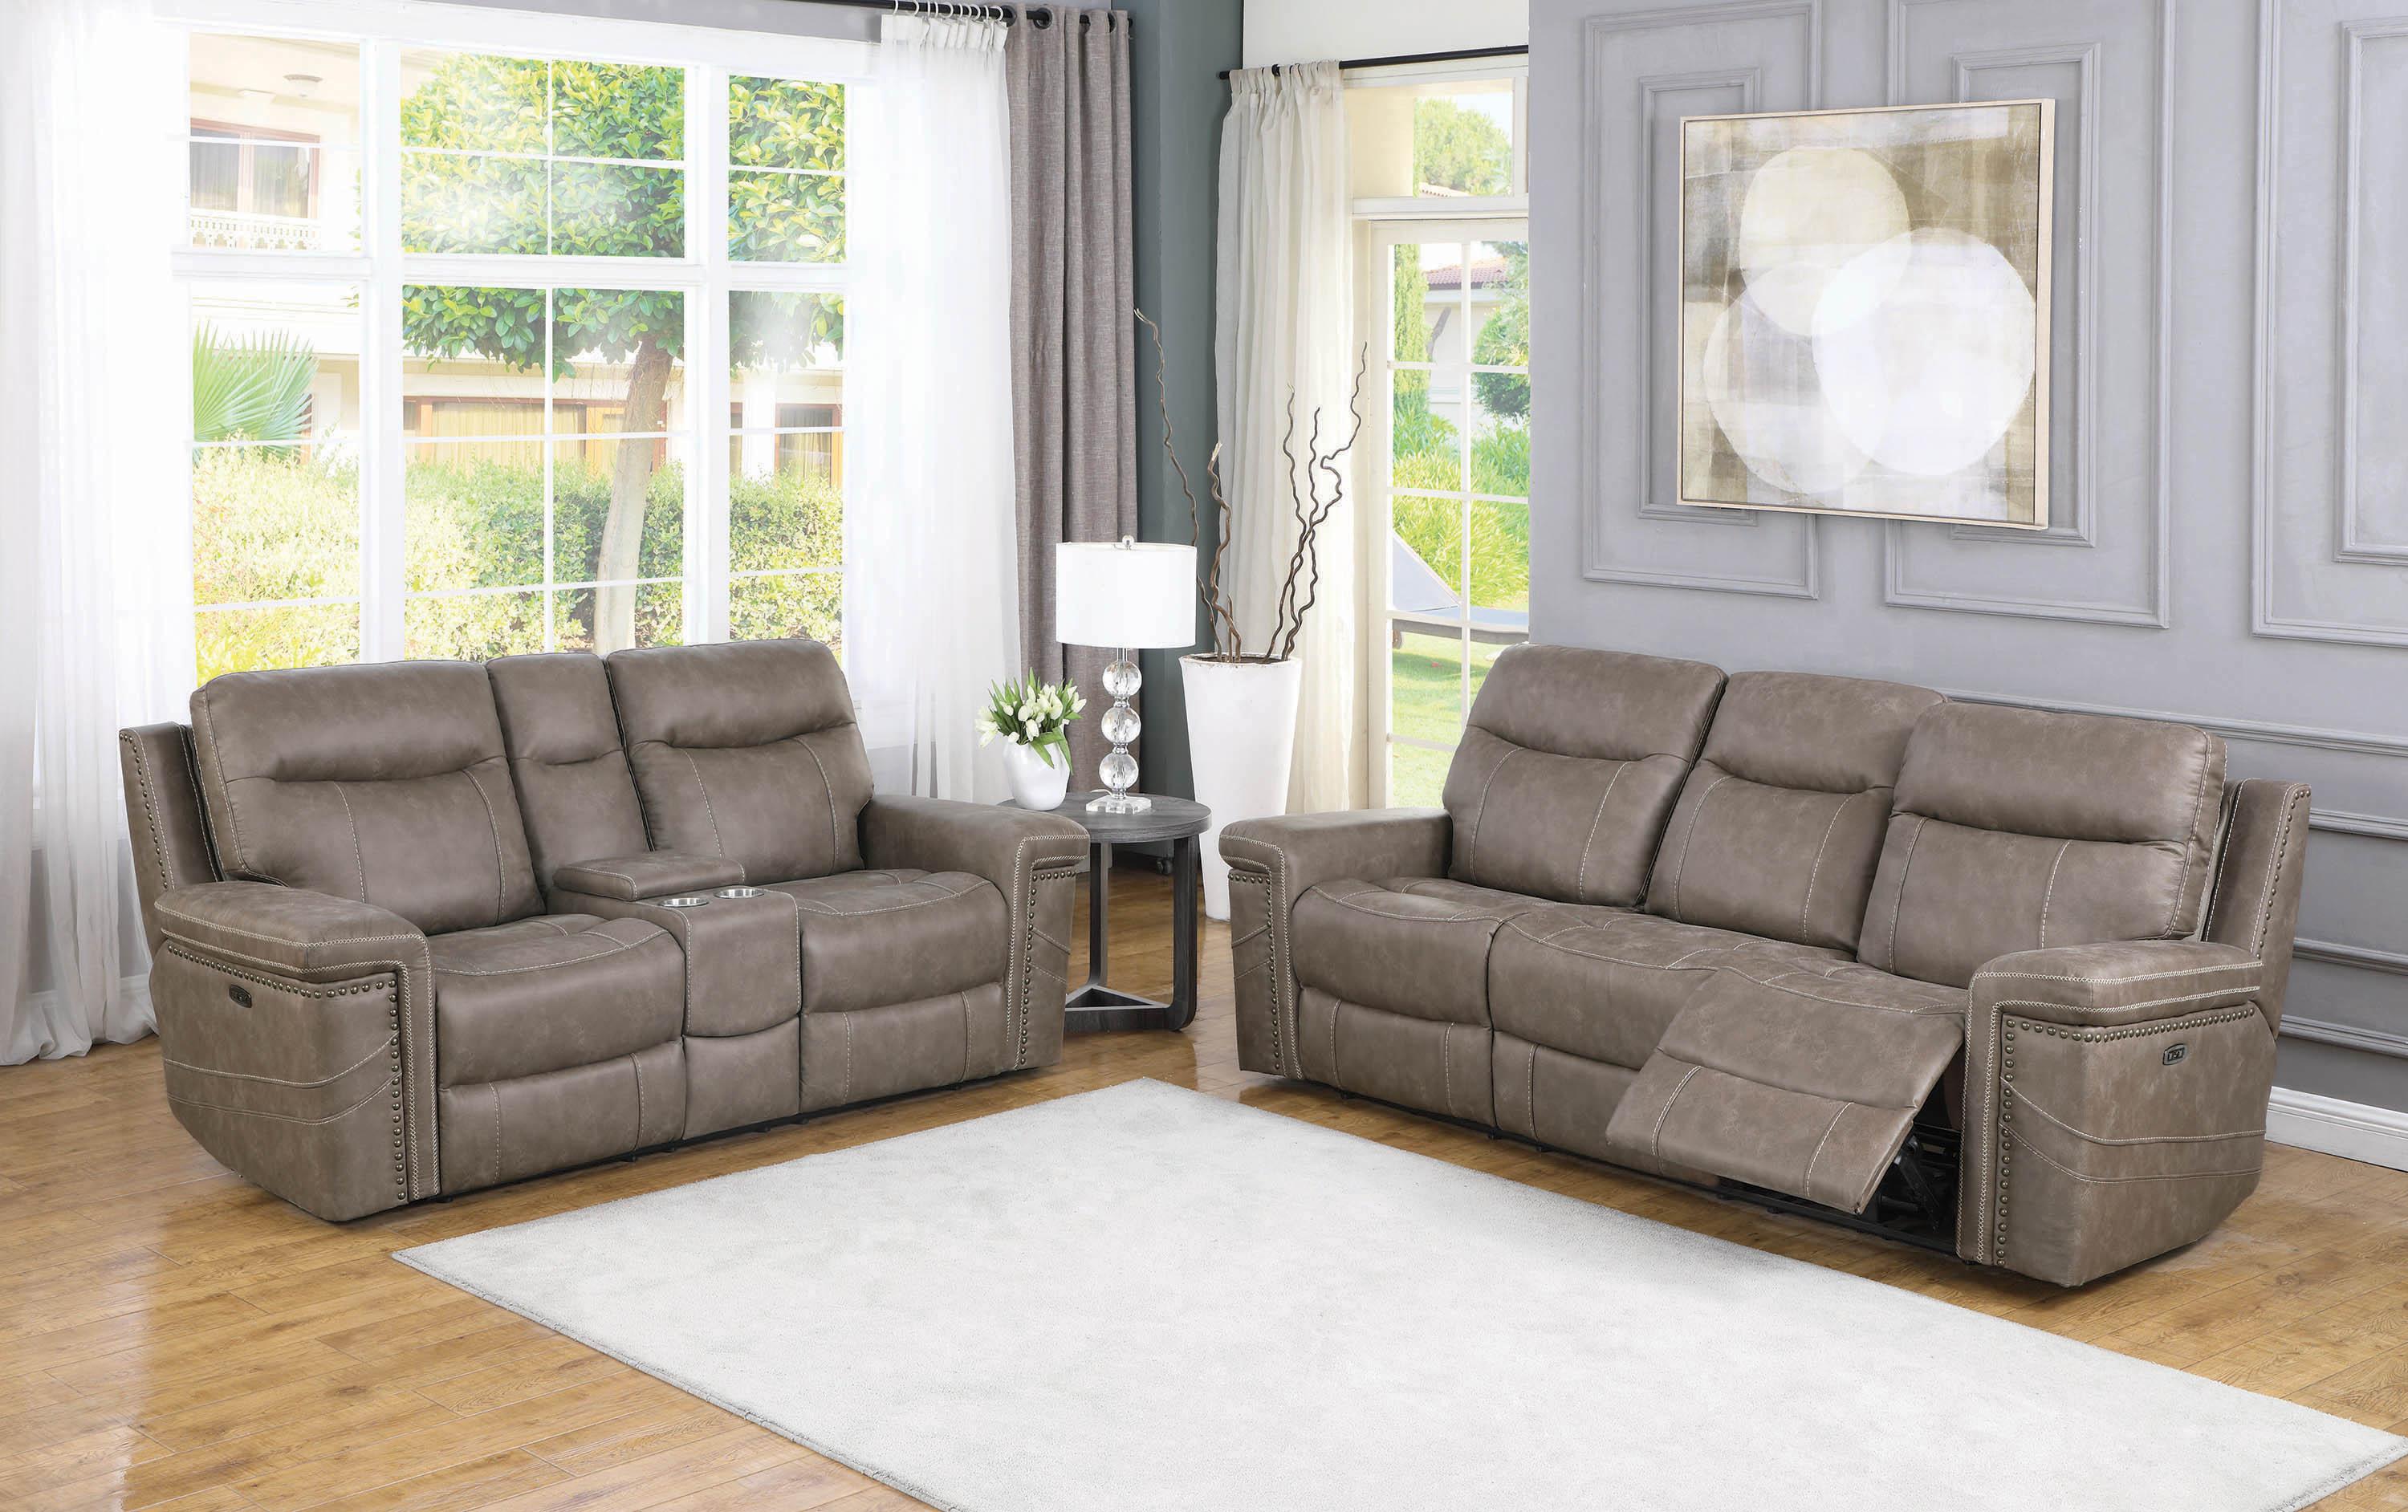 Modern Power Living Room Set 603517PP-S2 Wixom 603517PP-S2 in Taupe 